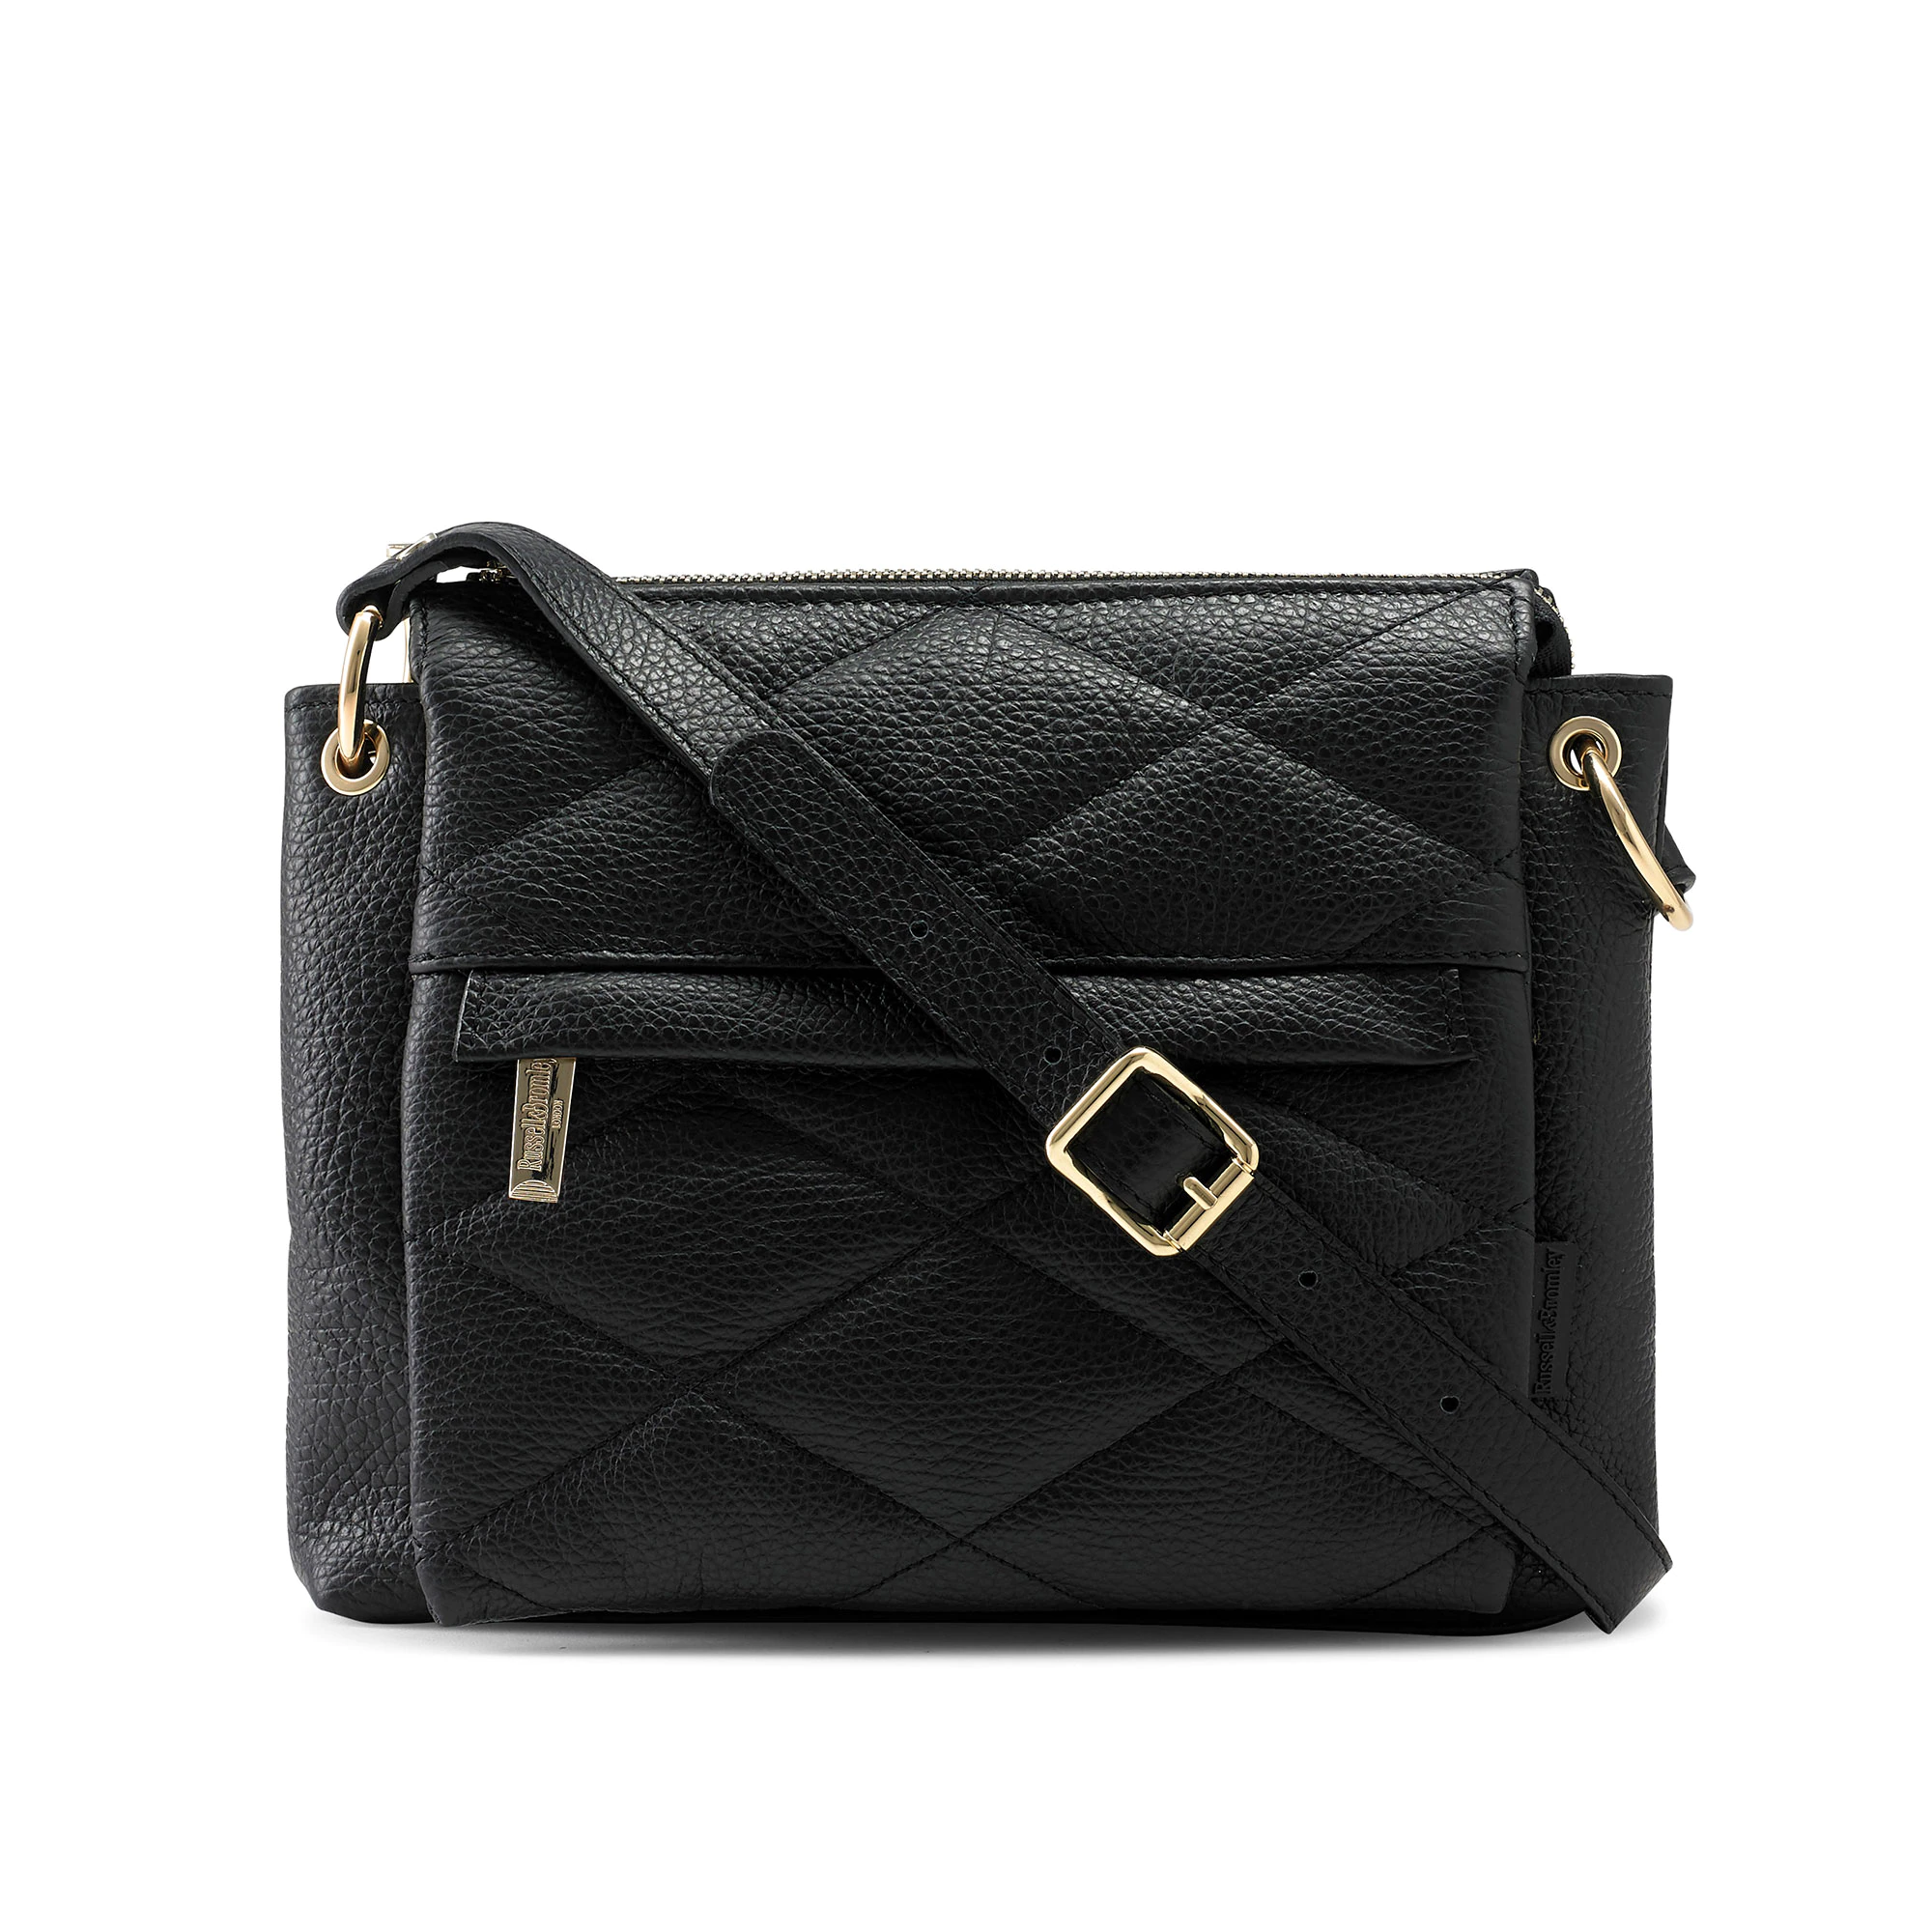 Russell And Bromley TROOPER Multi Pocket Crossbody Black 240522